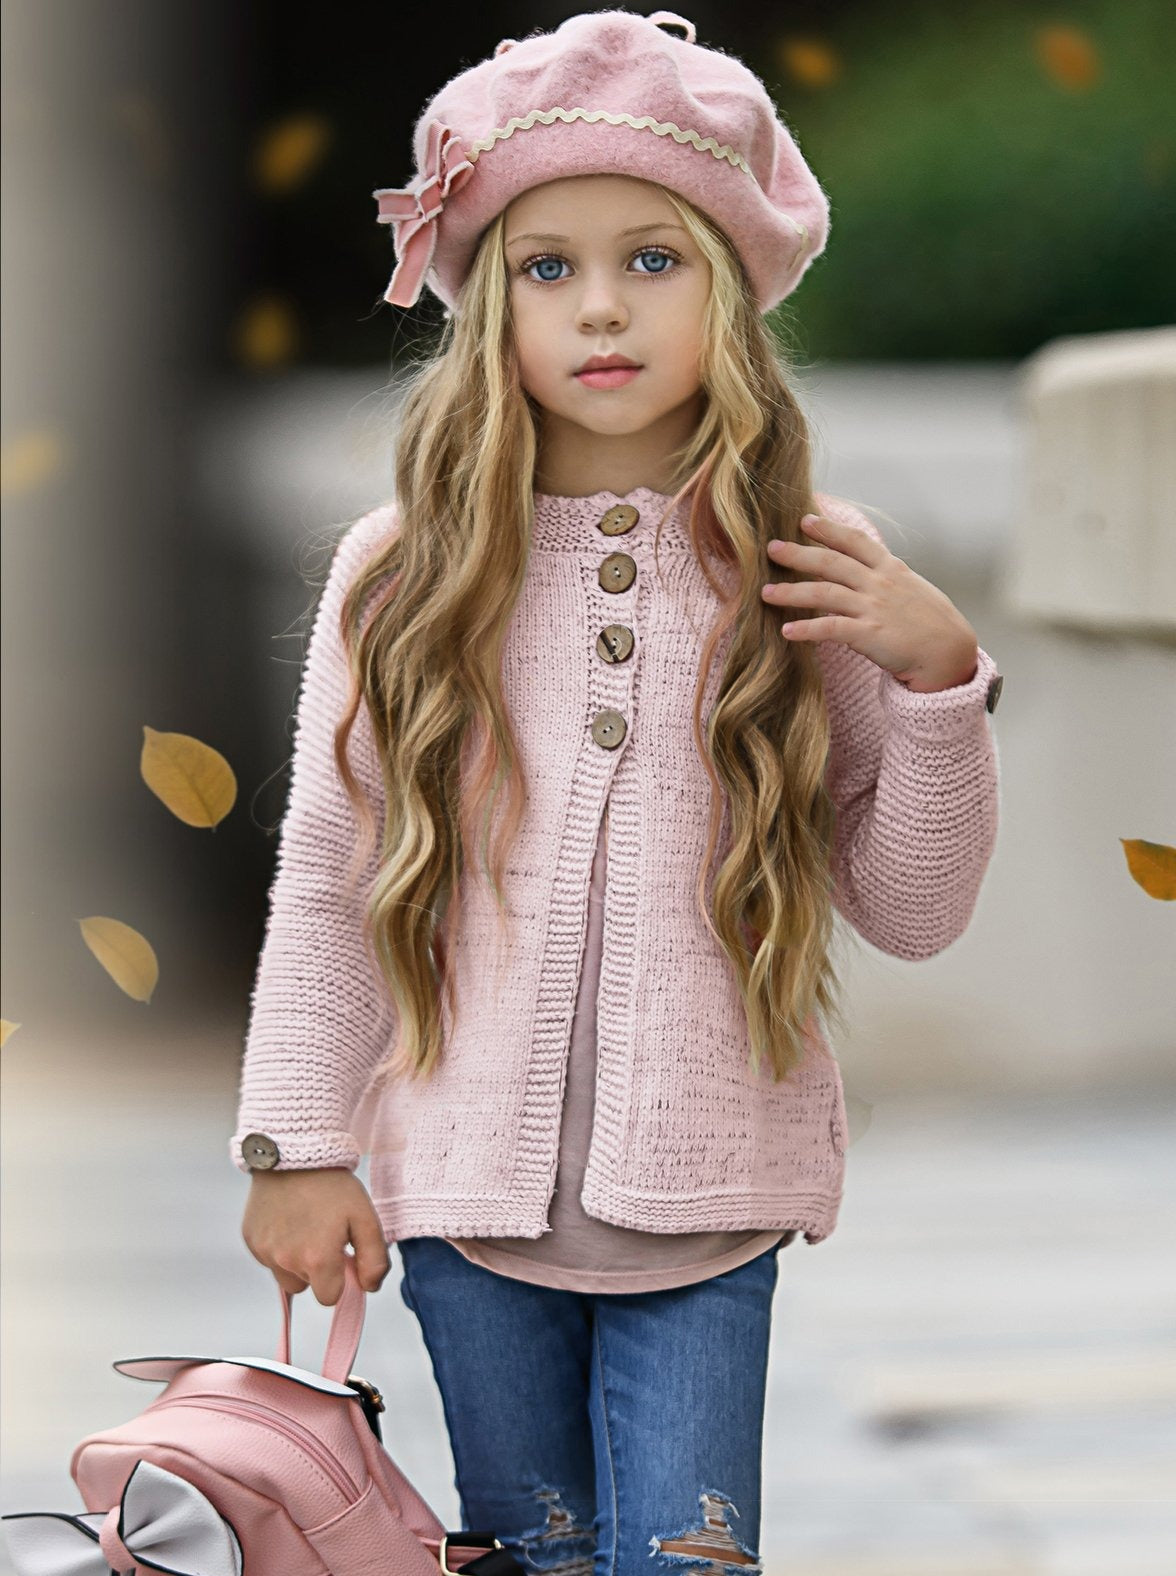 material Vamos Hacia abajo Little Girls Fall Pink Button Up Knit Cardigan - Mia Belle Girls